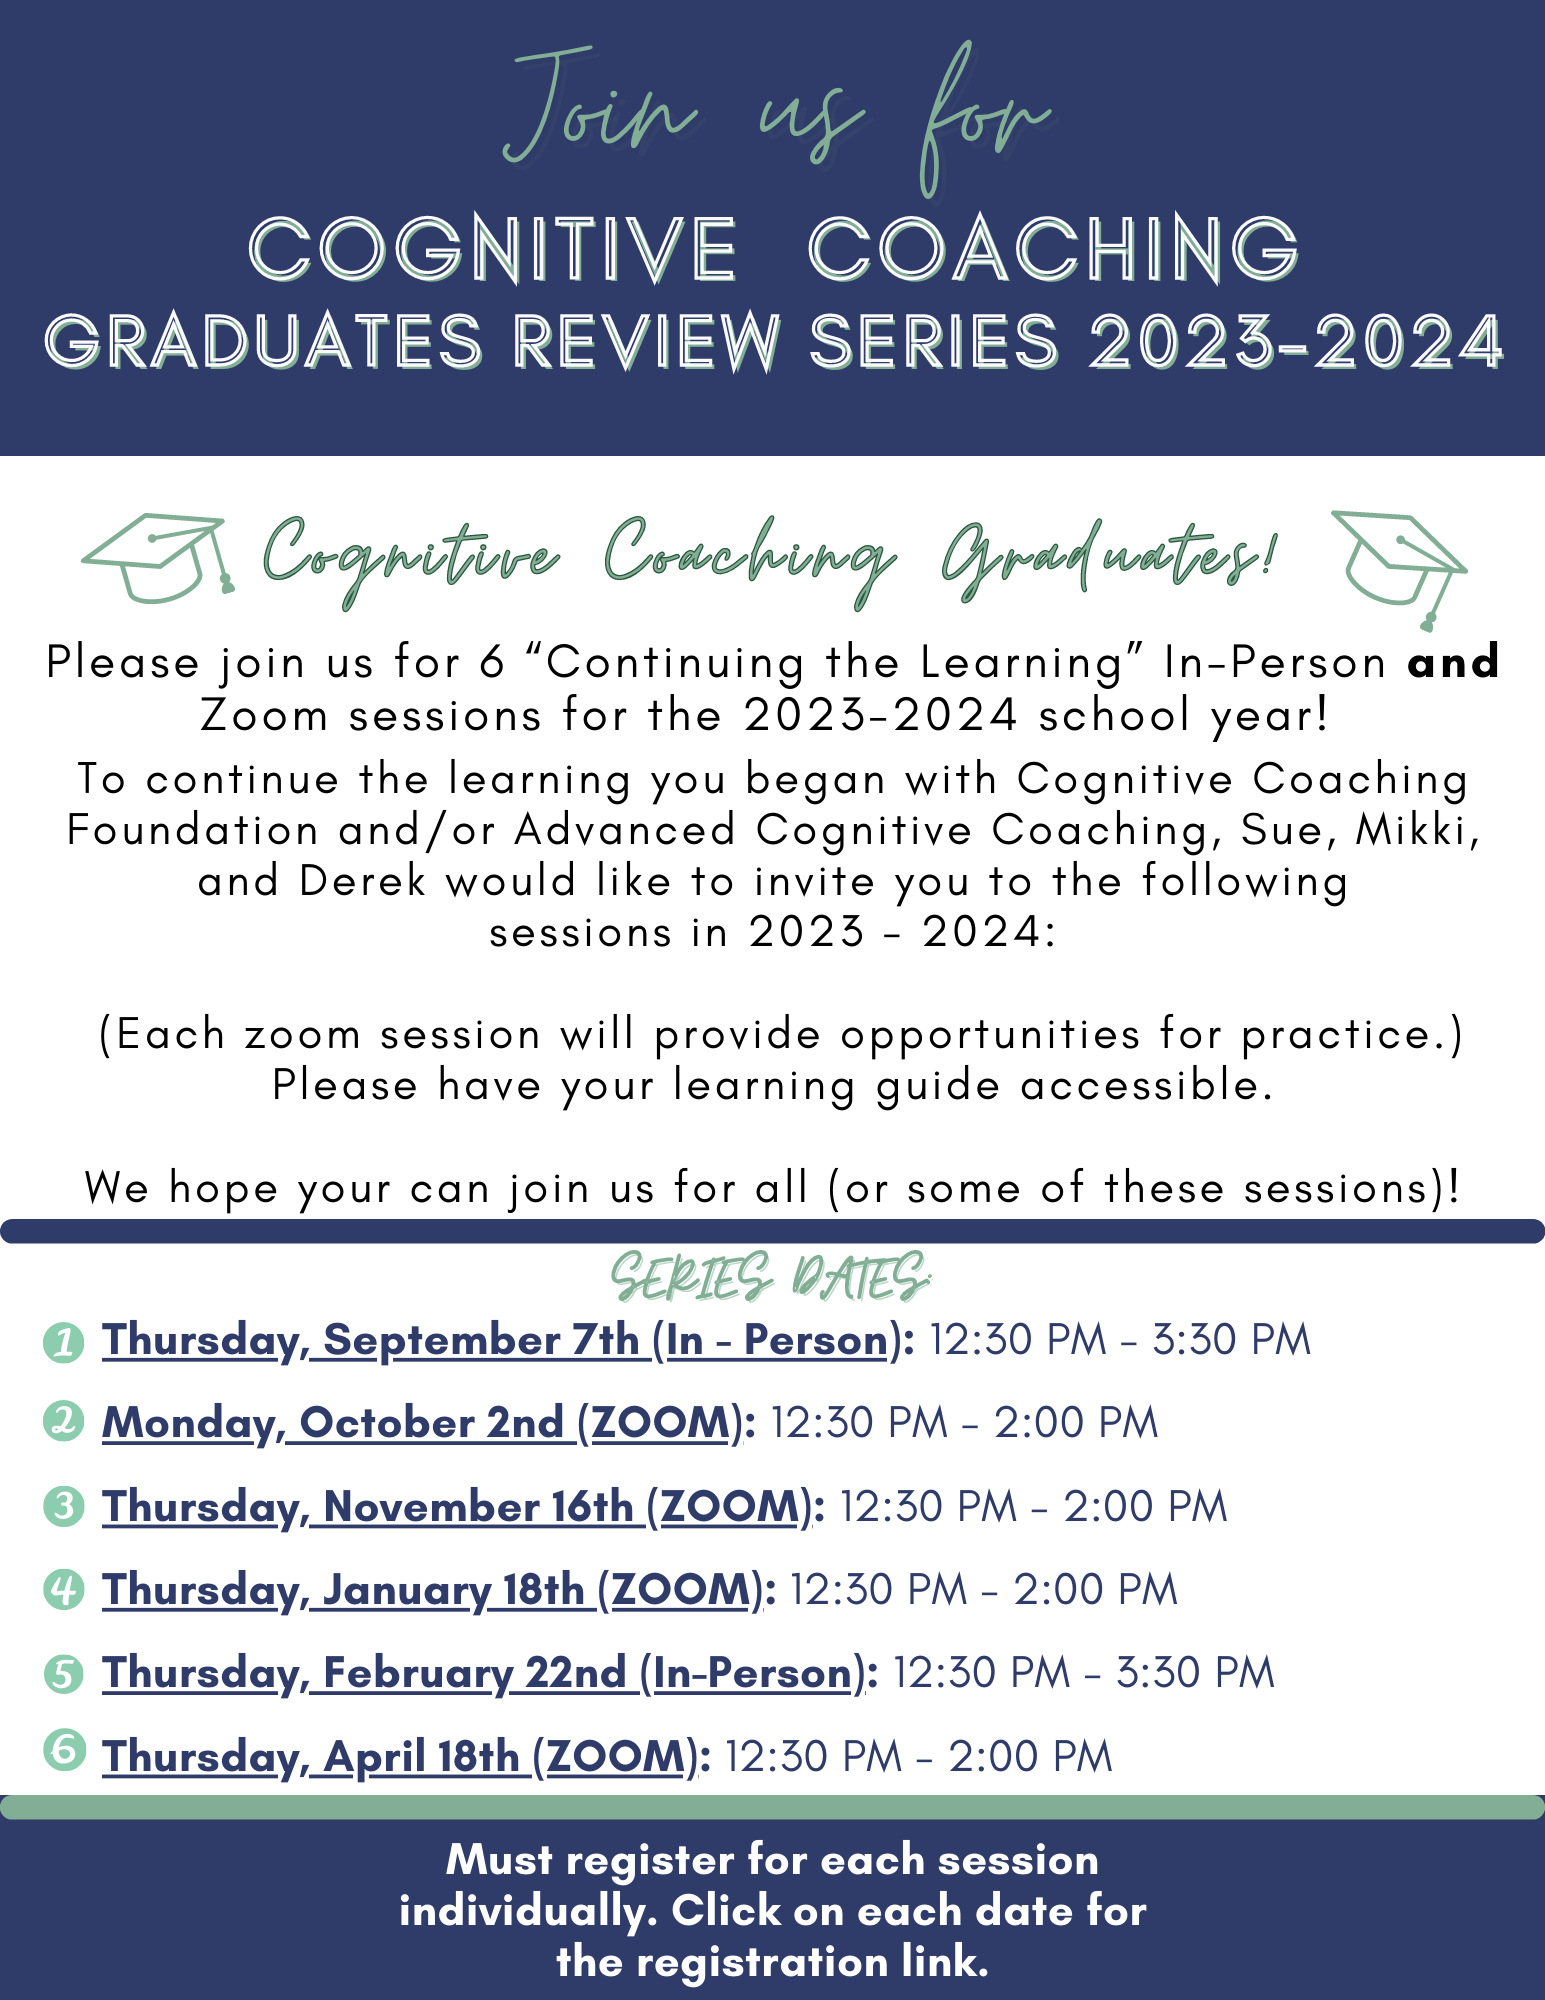 Click here to register for Cognitive Coaching Graduates Review Series 2023-2024